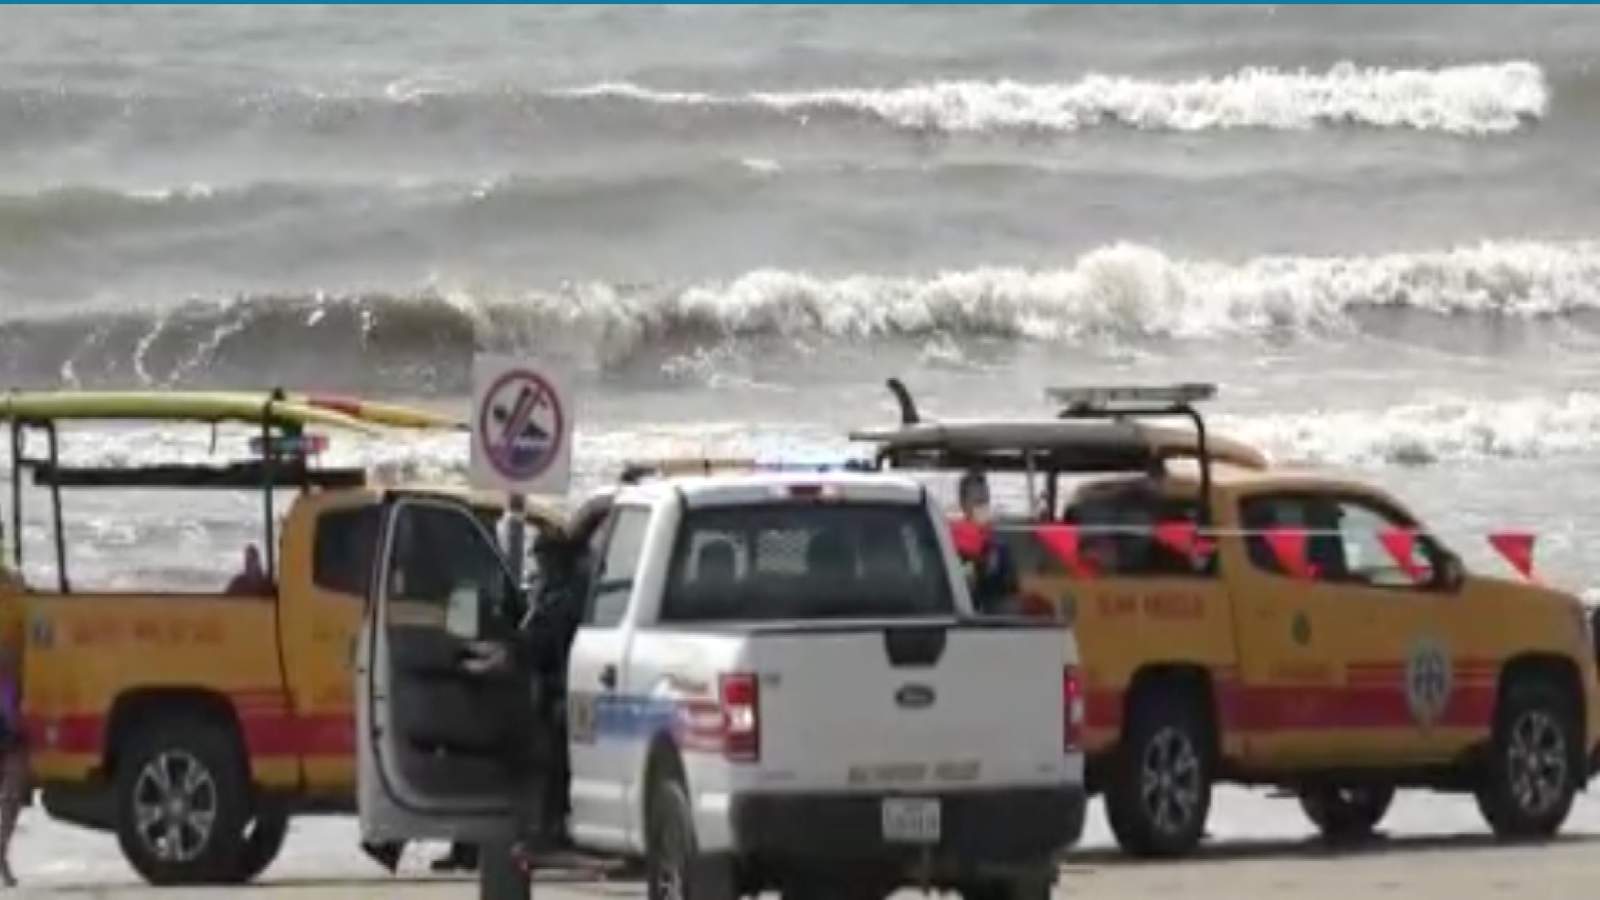 2 people drown in Galveston in less than 24 hours during Labor Day weekend